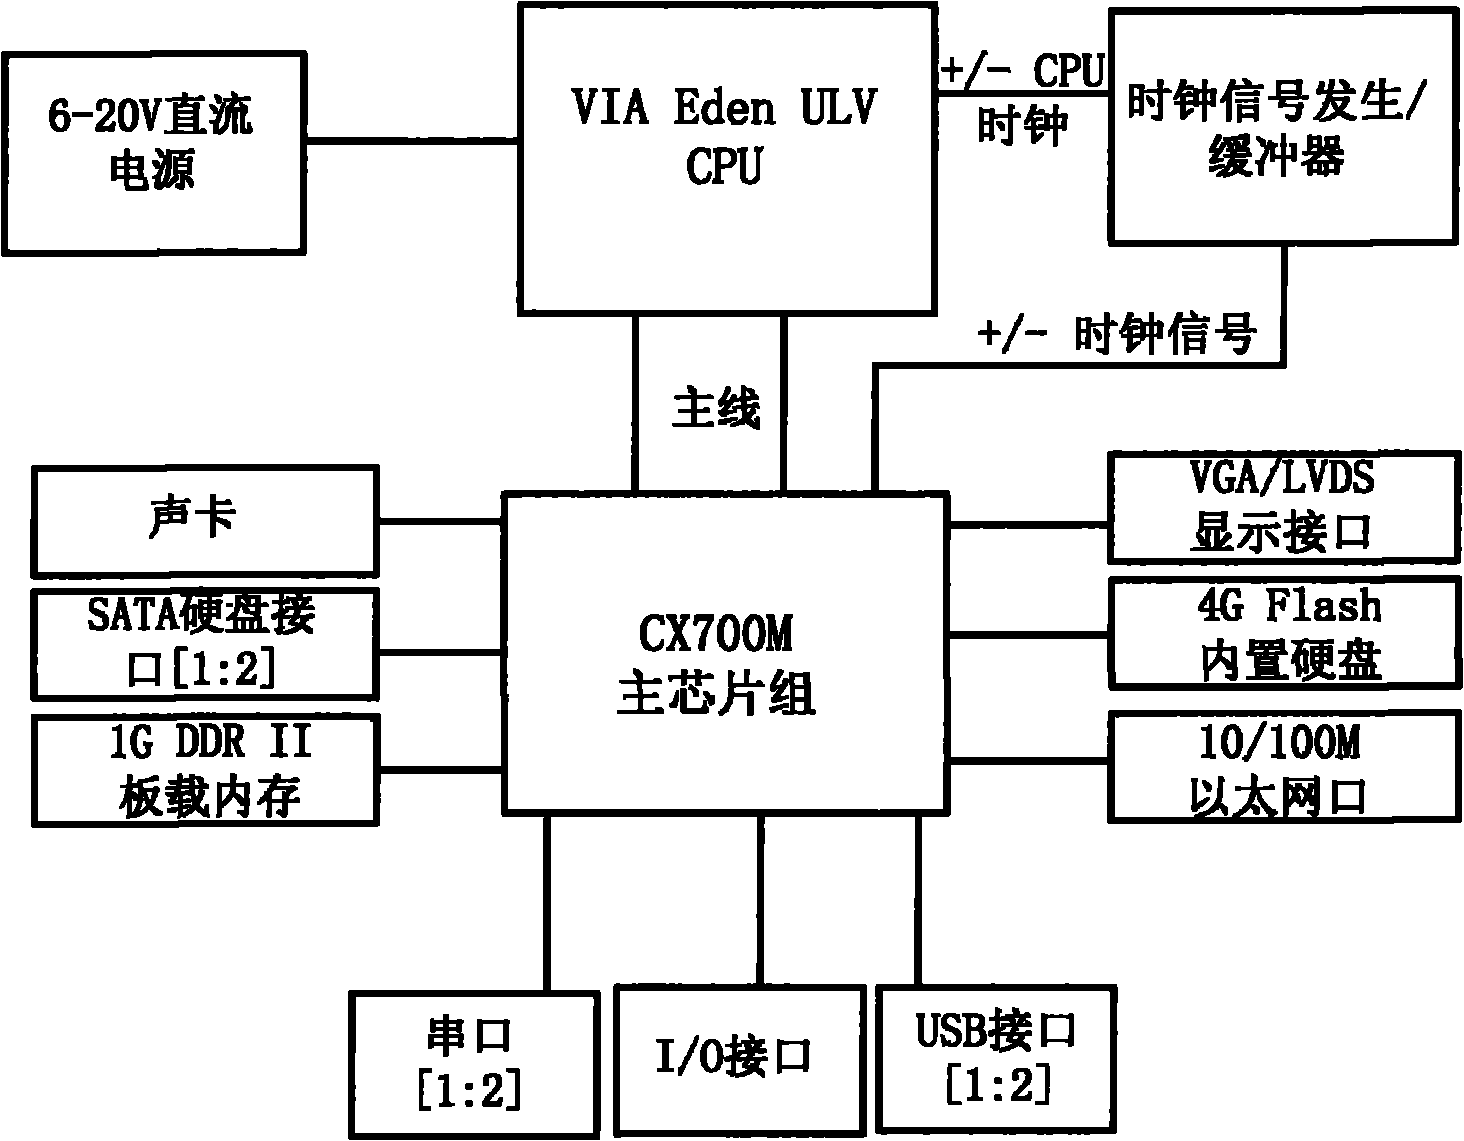 Embedded industrial computer based on superminiature X86 structure